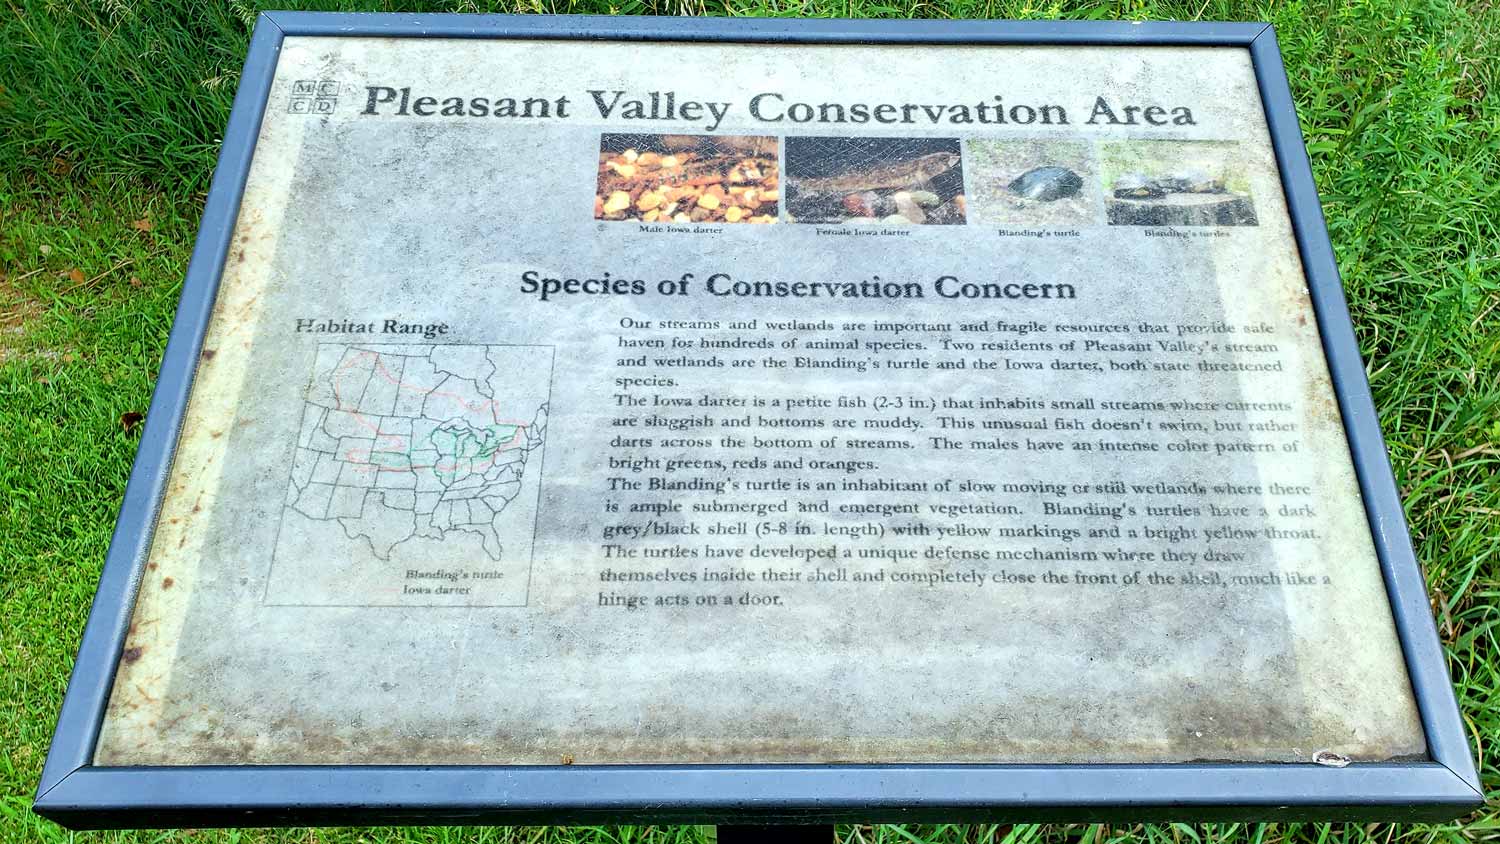 Informational placard near Laughing Creek at the Pleasant Valley Conservation Area.